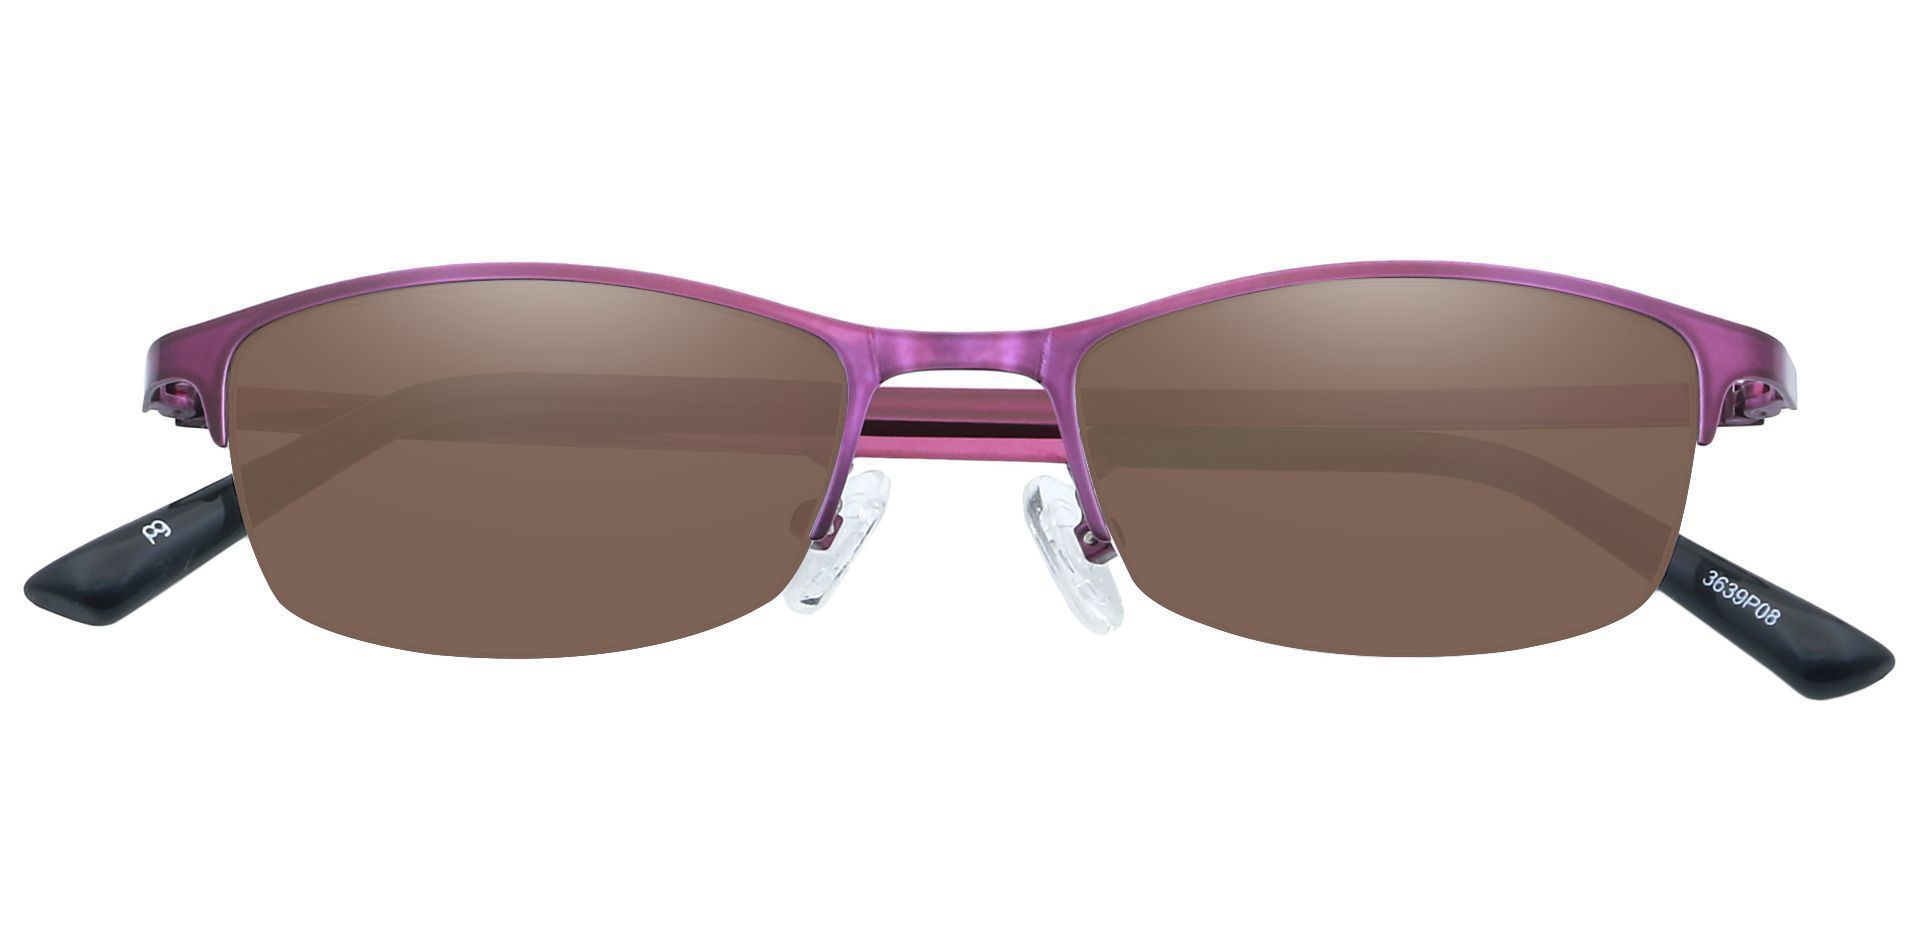 Eliza Rectangle Reading Sunglasses -  Purple Frame With Brown Lenses